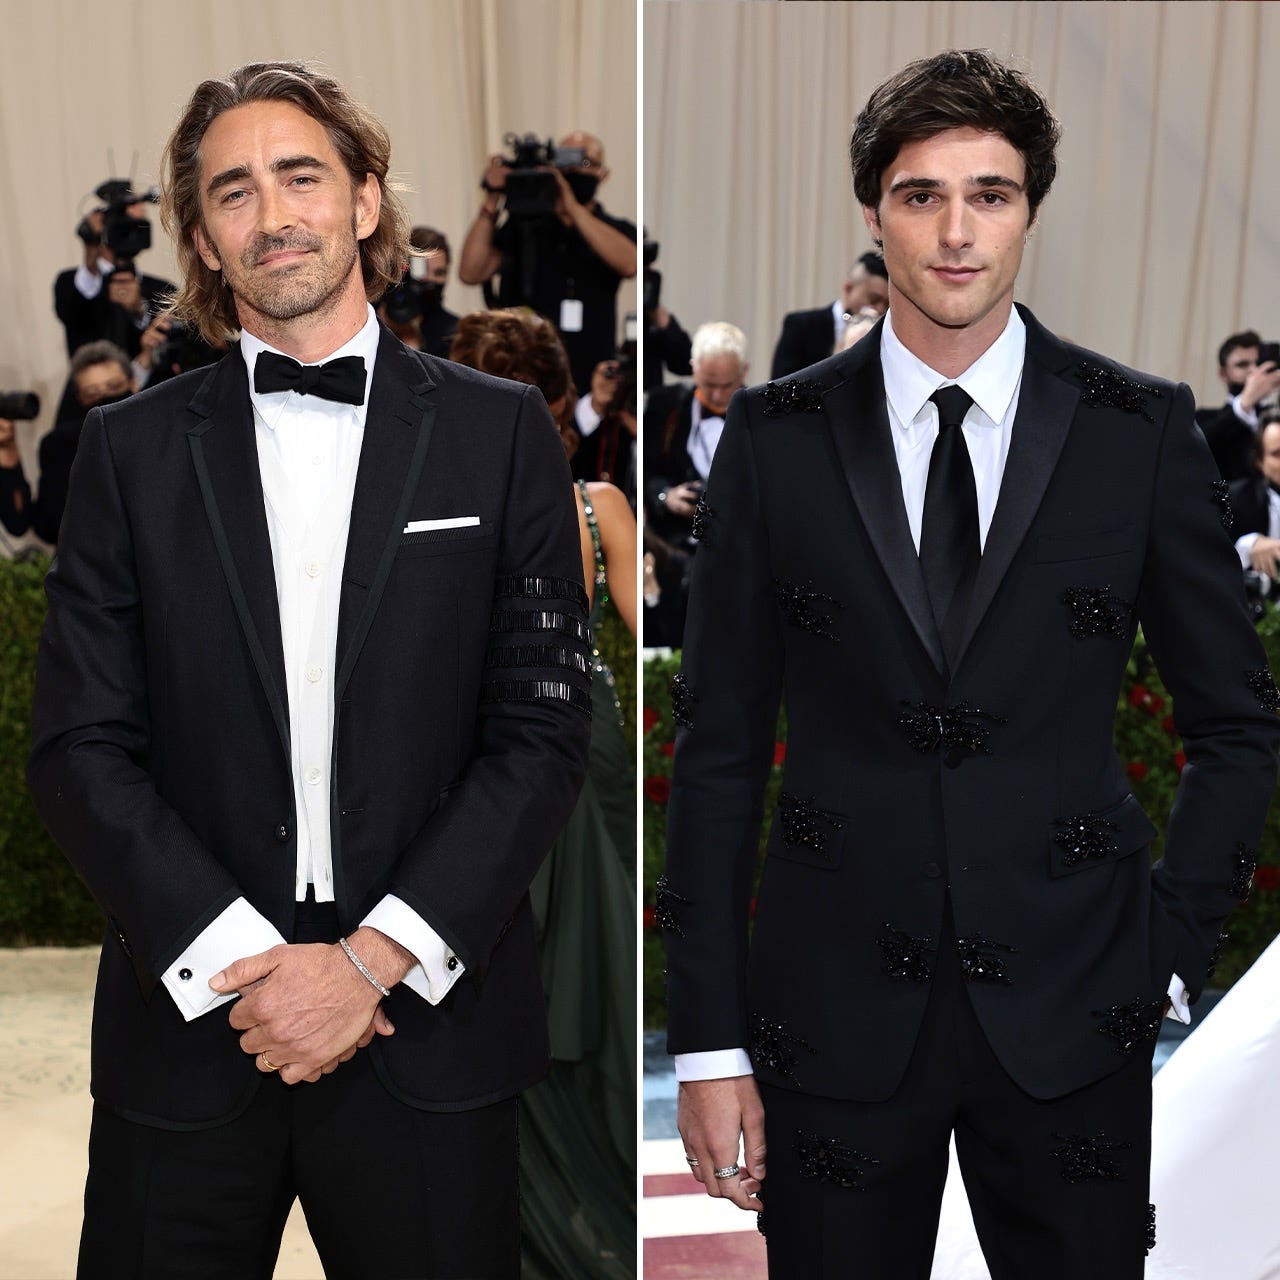 Lee Pace and Jacob Elordi